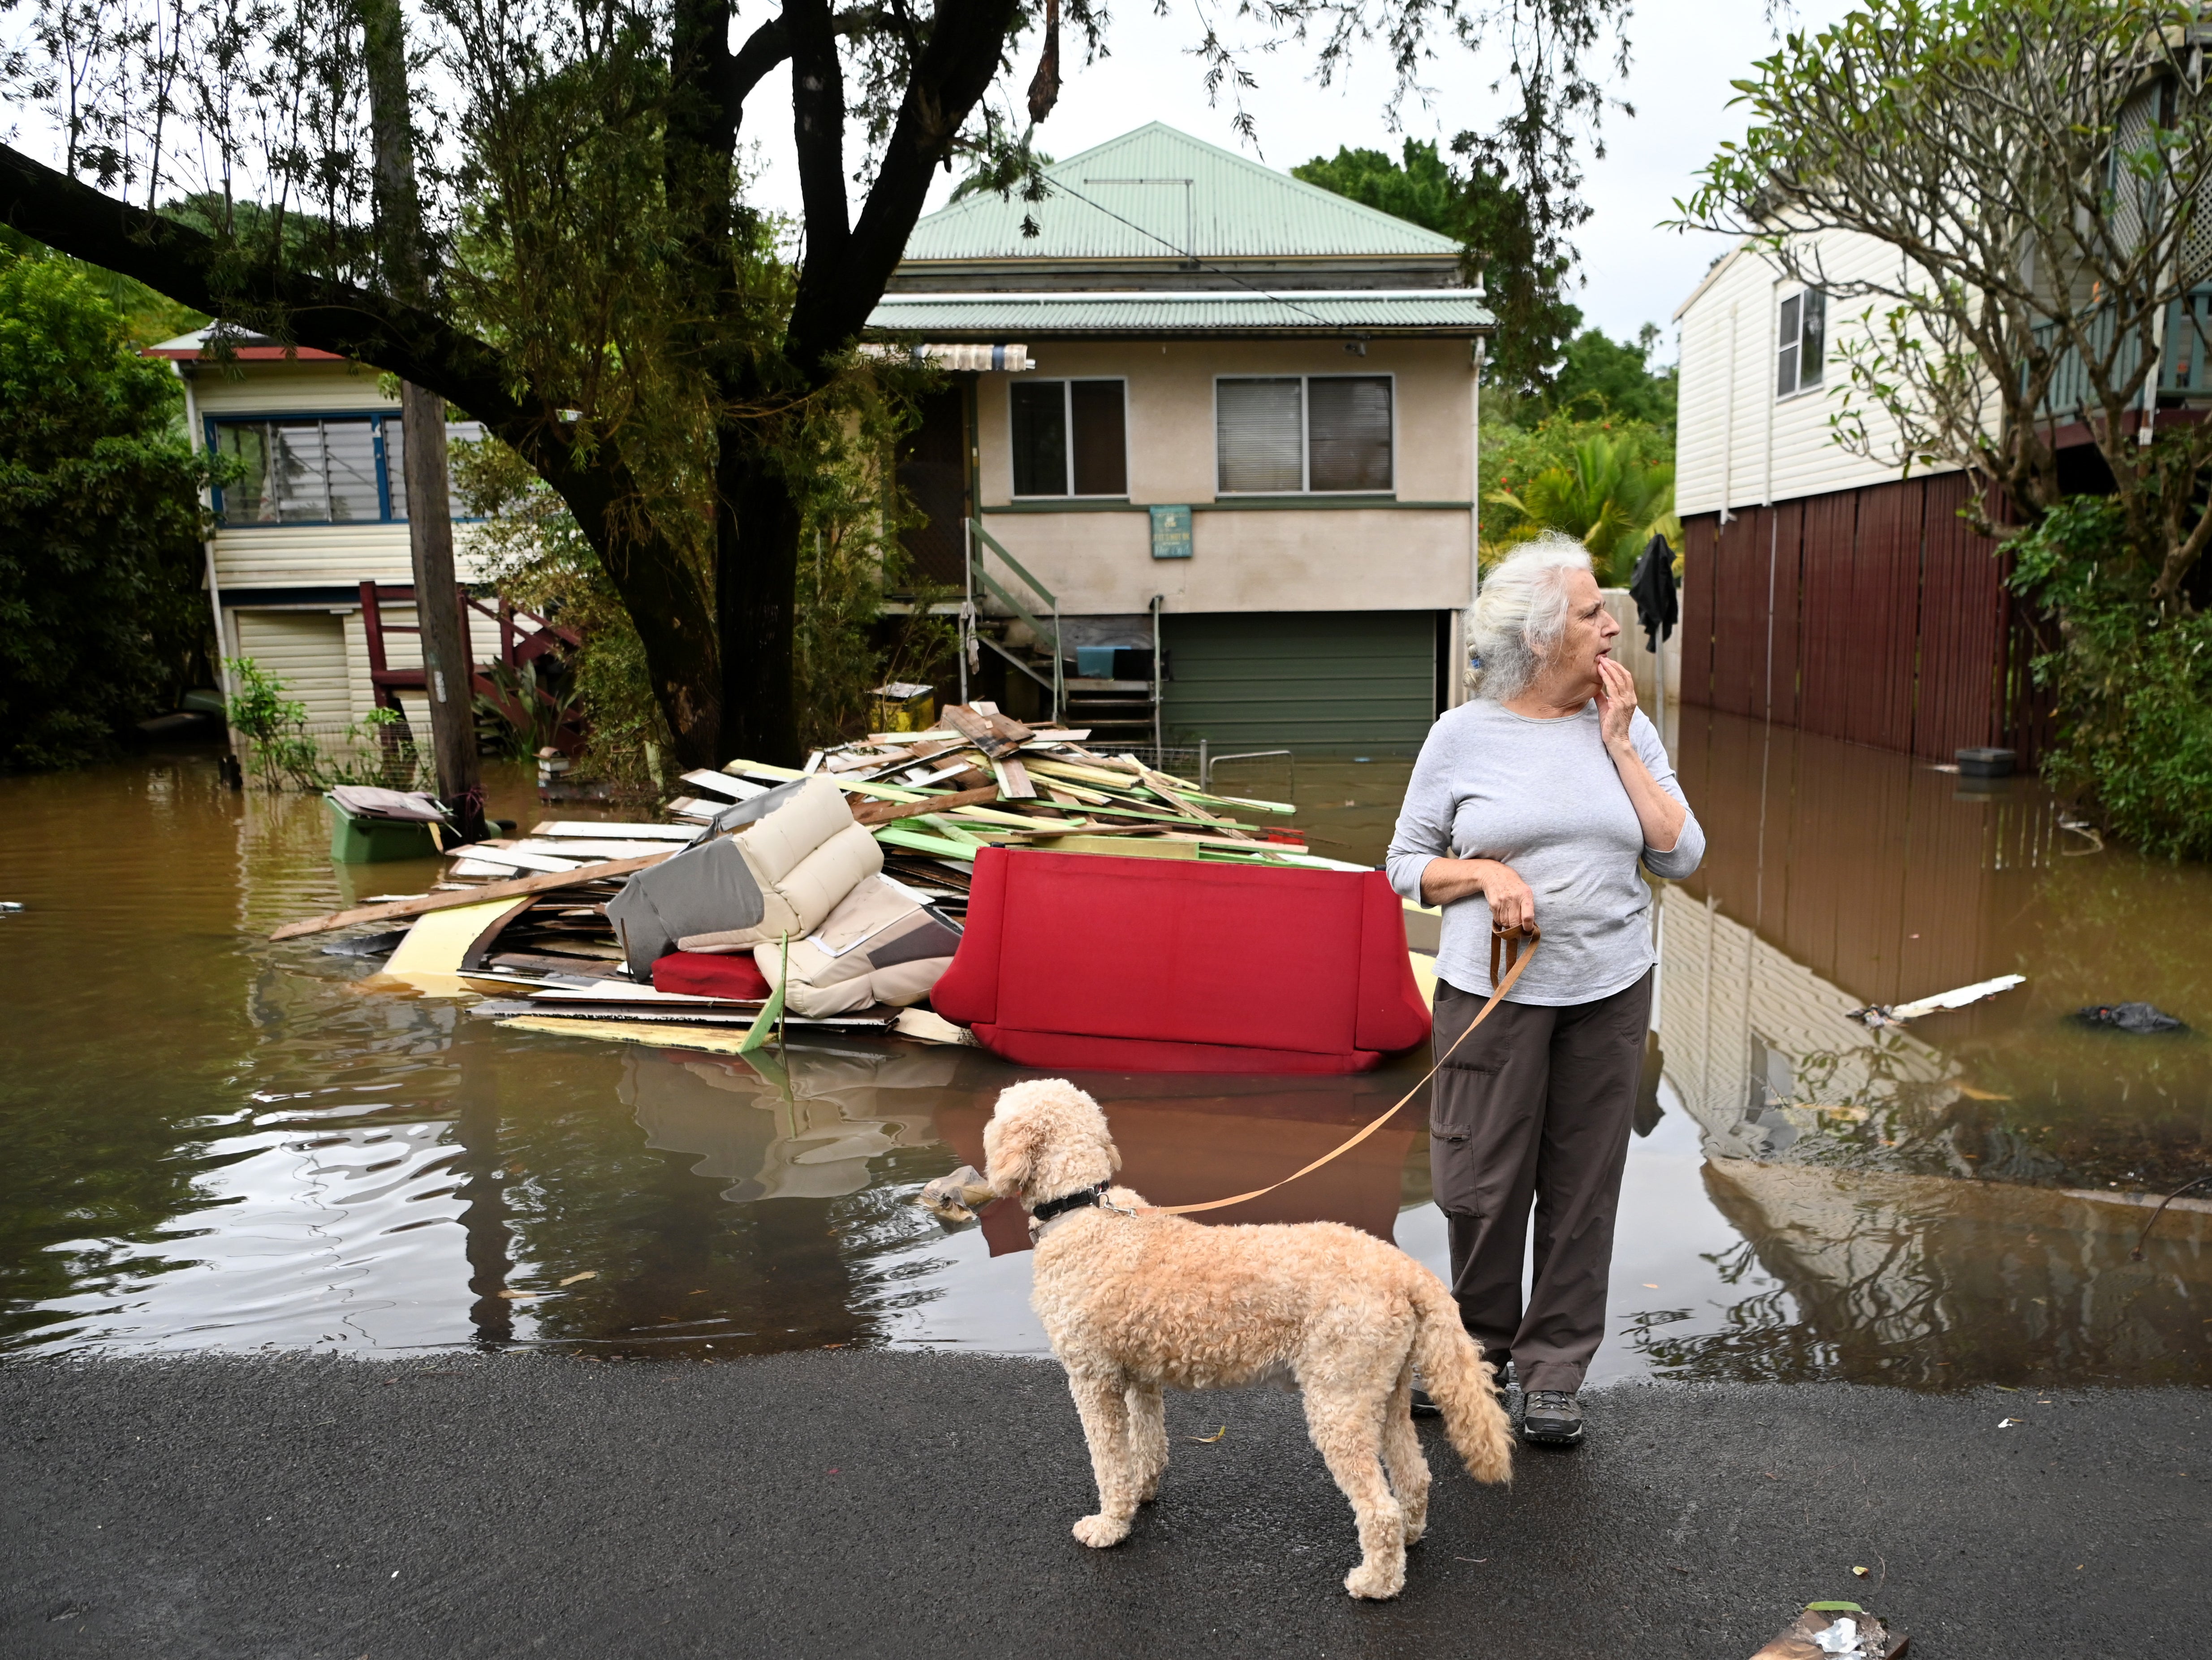 Local resident Cathy Jordan inspects floodwater in her street in Lismore after it was submerged in March